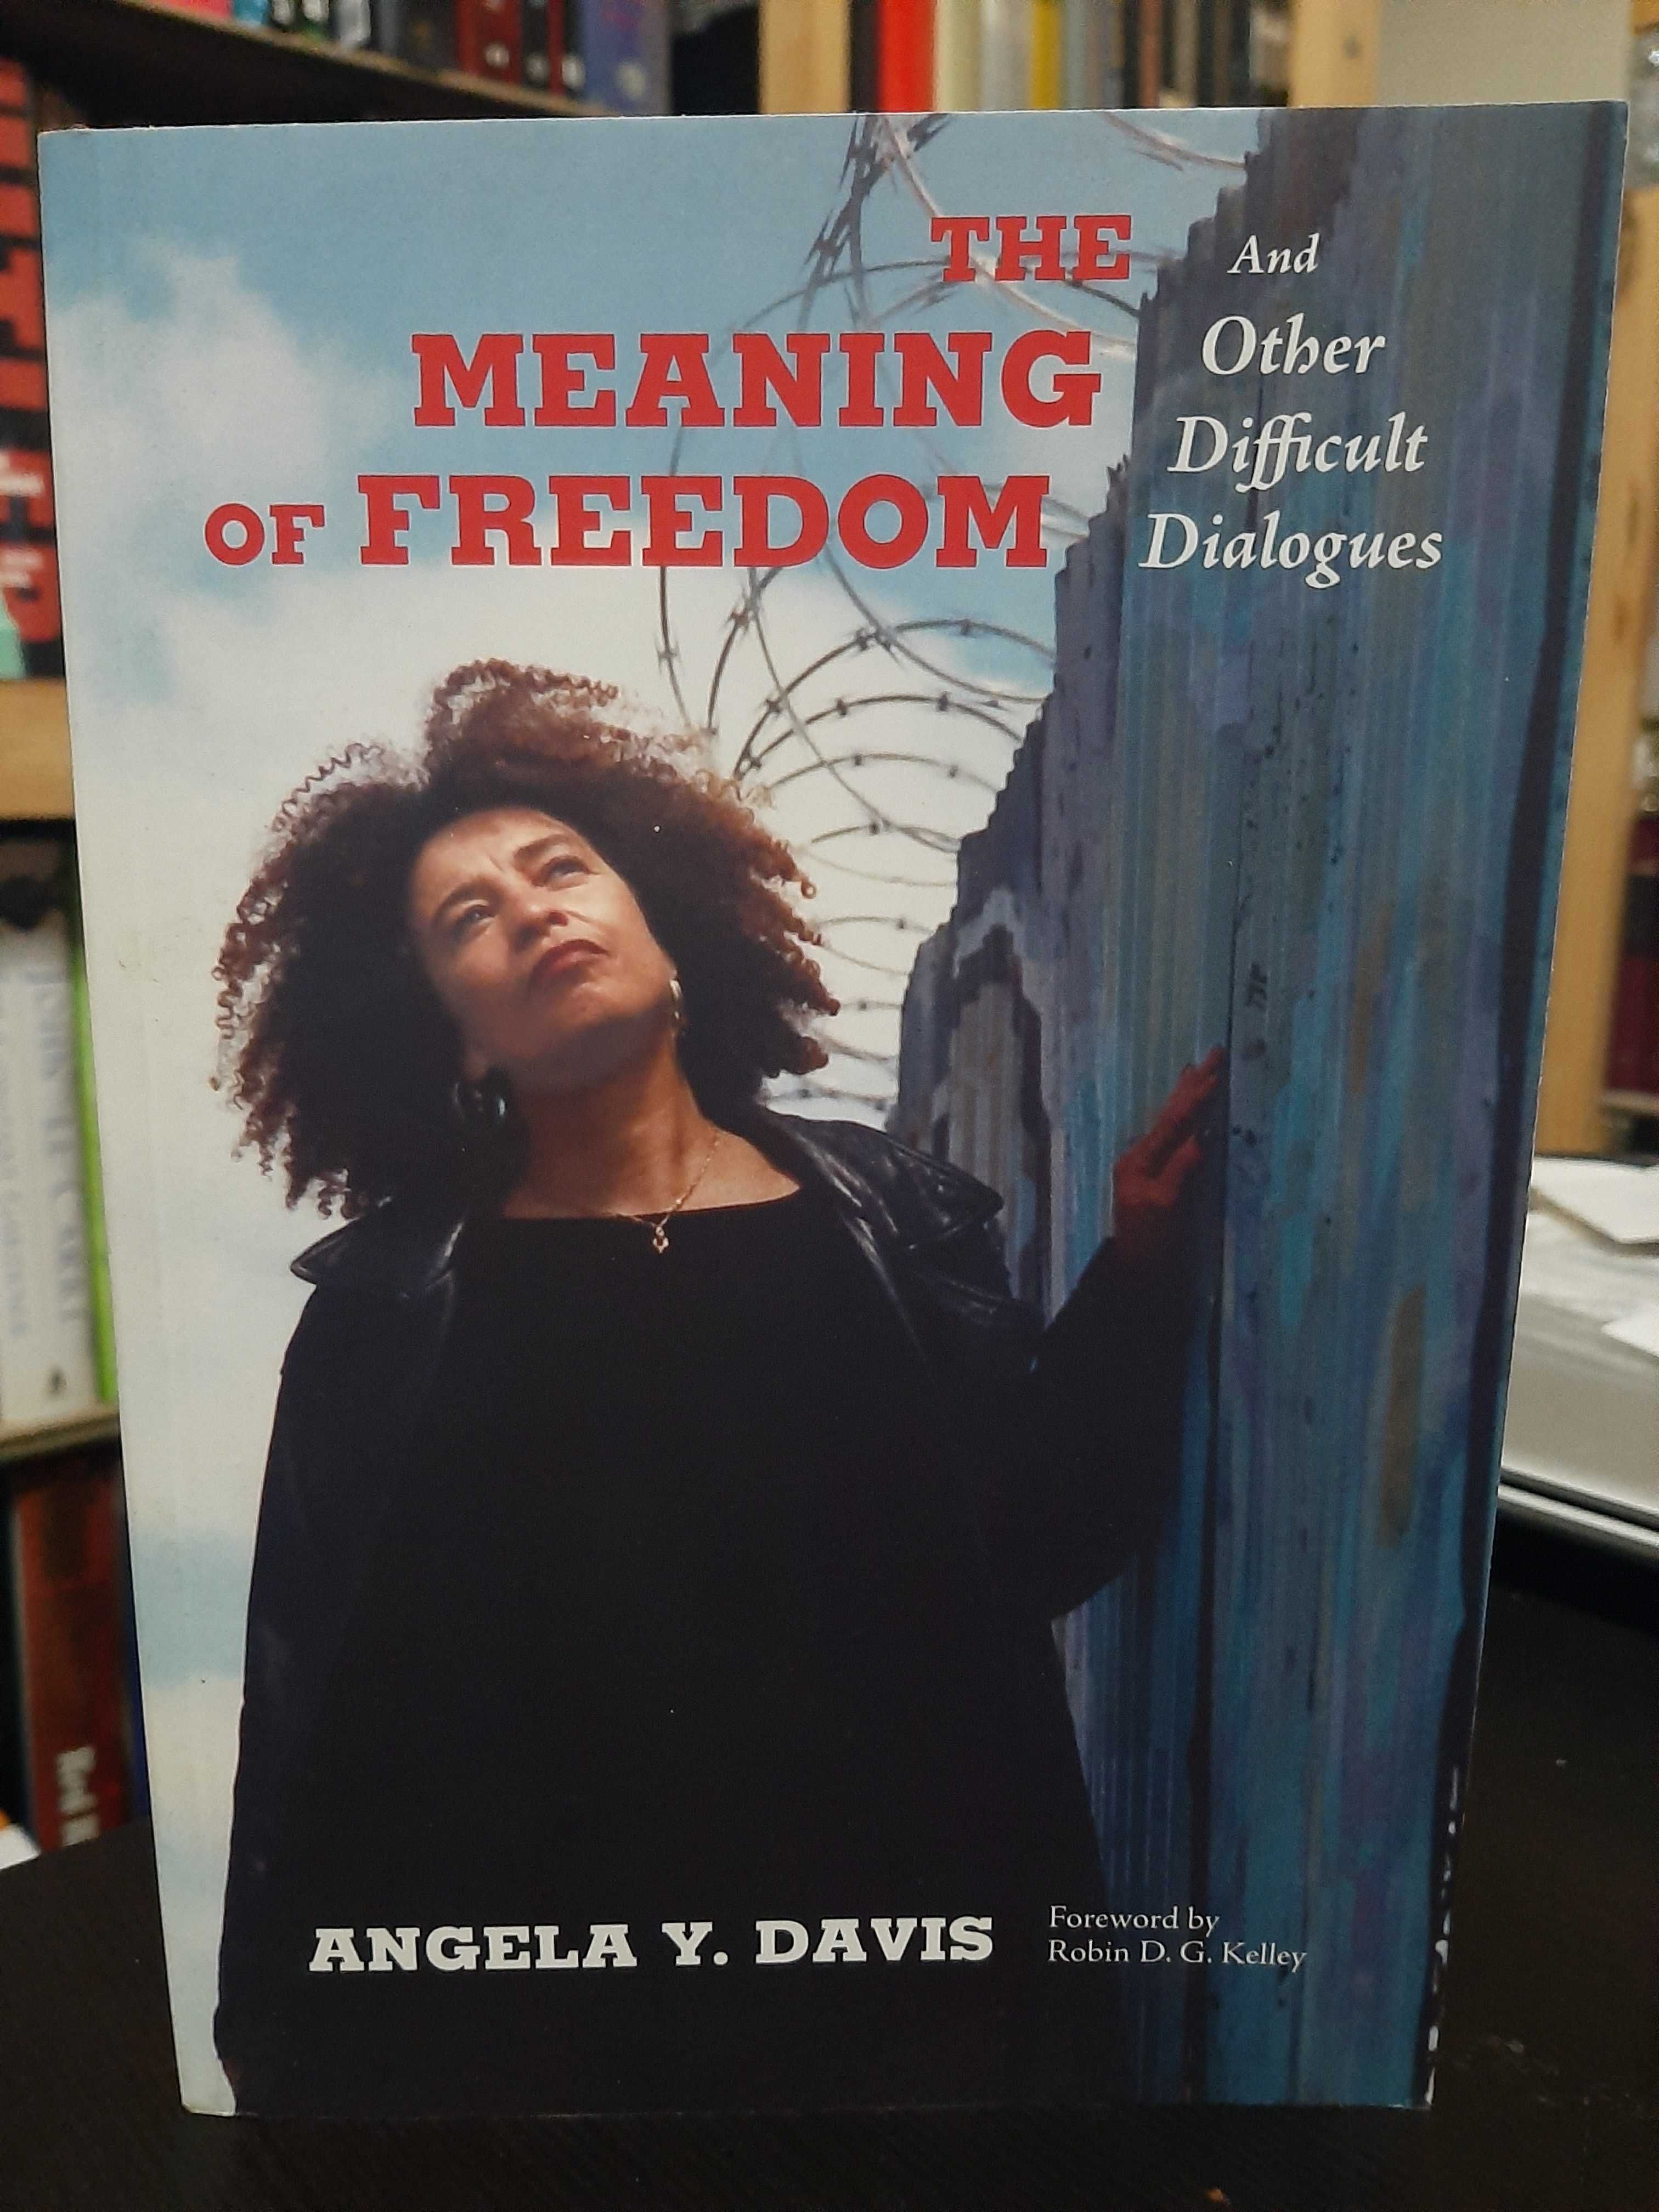 Angela Y. Davis – The Meaning of Freedom and other Difficult Dialogues